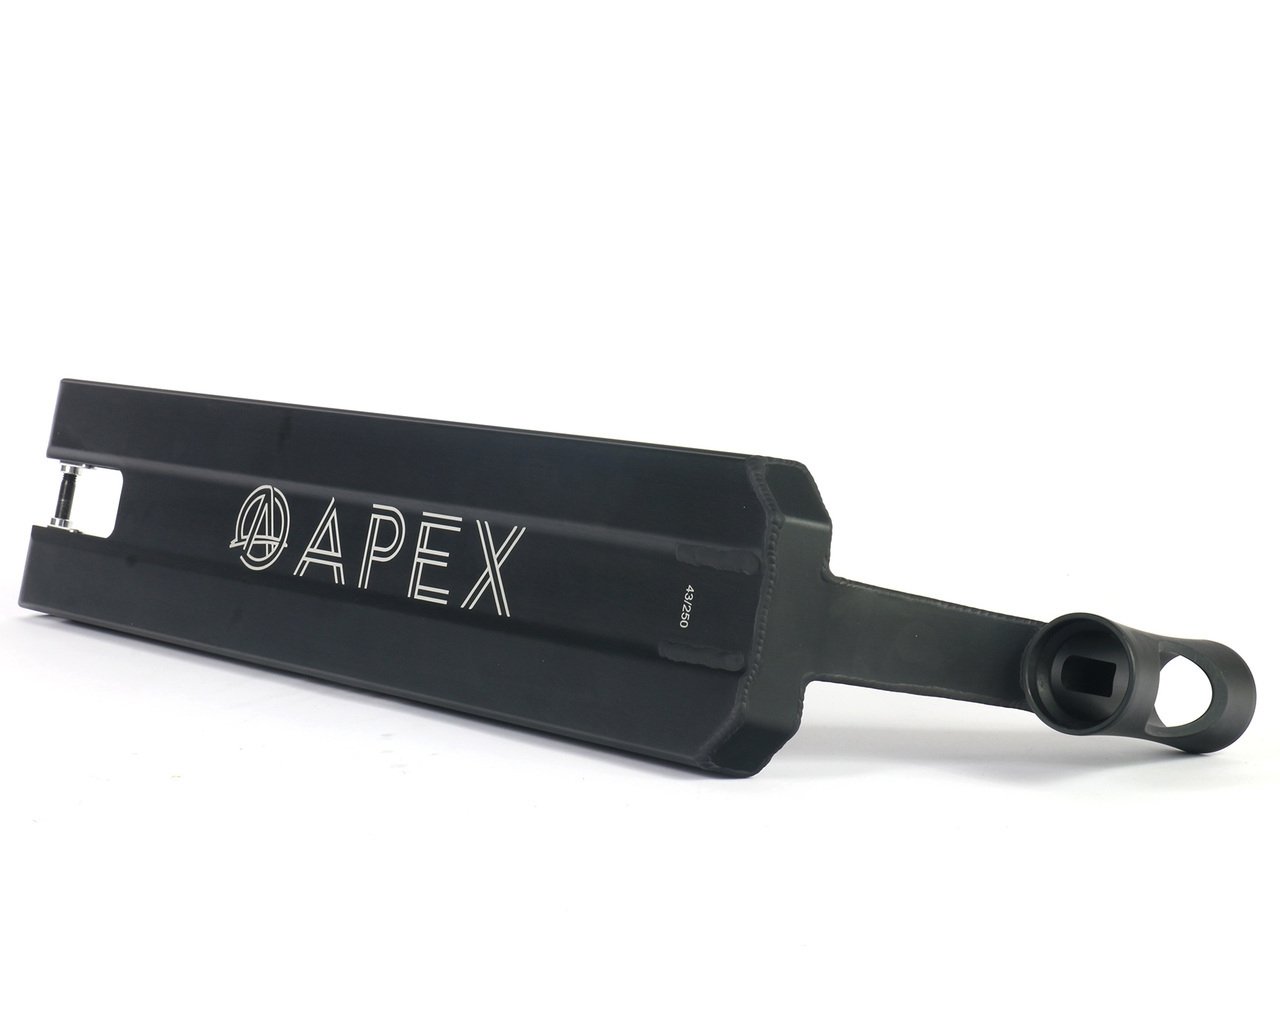 Apex Pro Black Boxed Stunt Scooter Deck - 5" x 20.9" - Angle